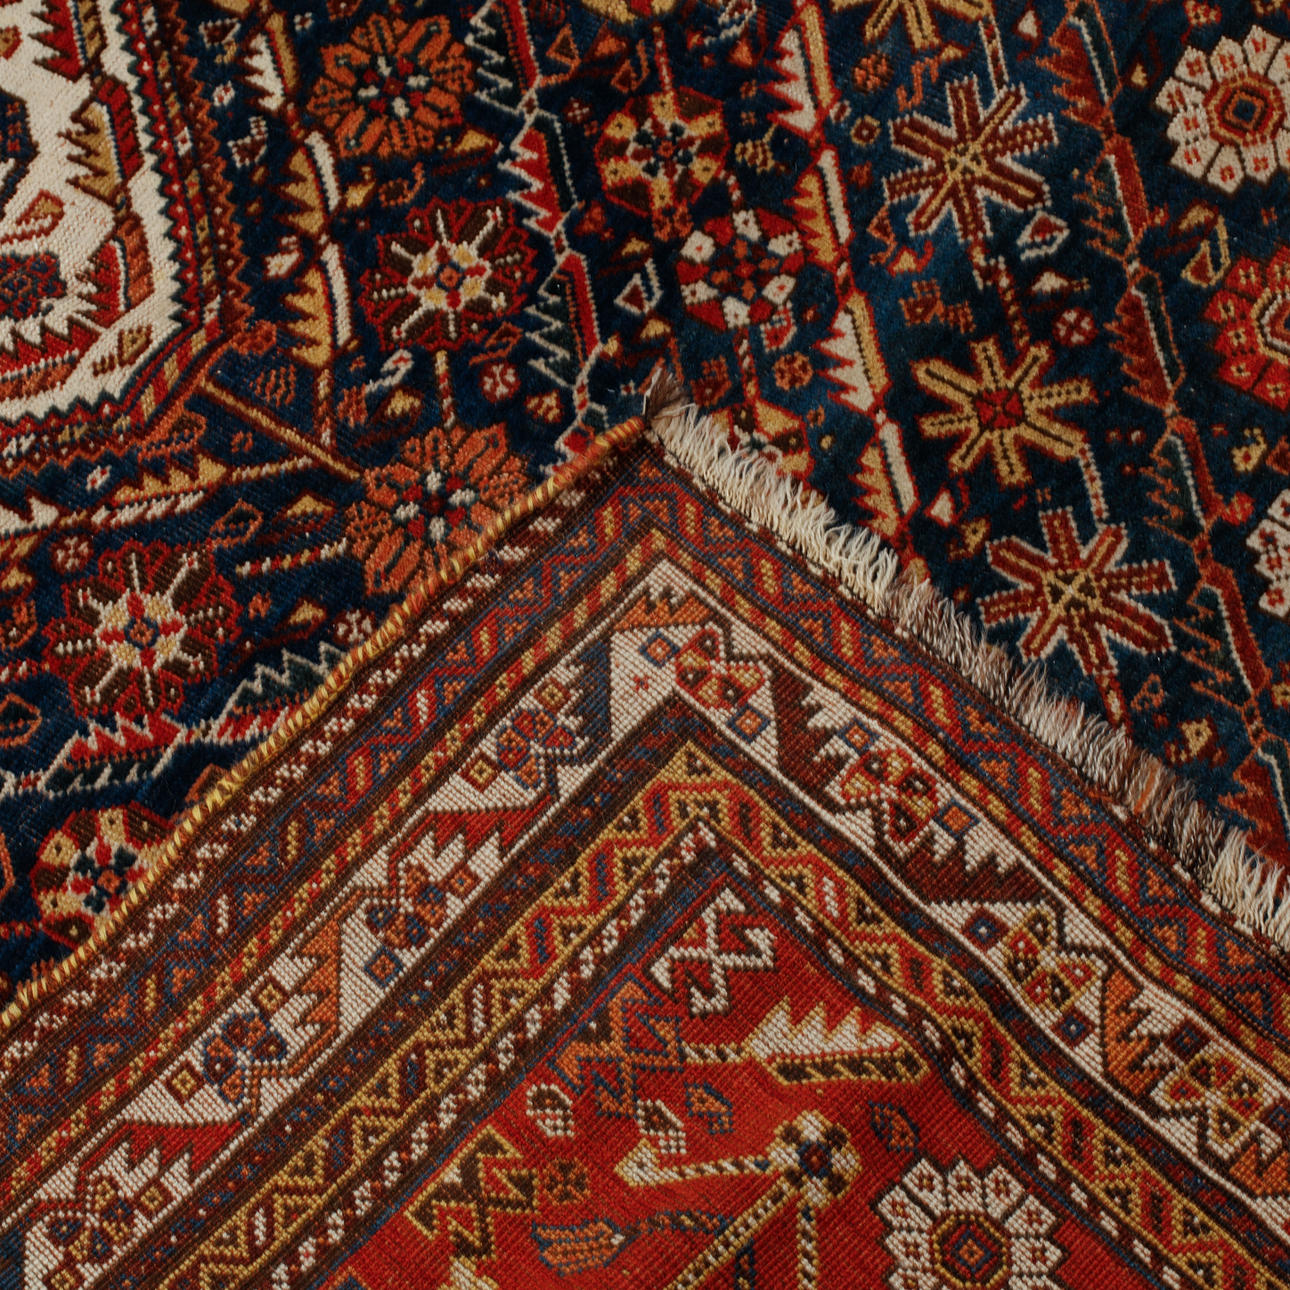 Antique Persian Gashgahi nomadic carpet, with 100% organic colors. Size 140 x 240 cm. In mint condition!